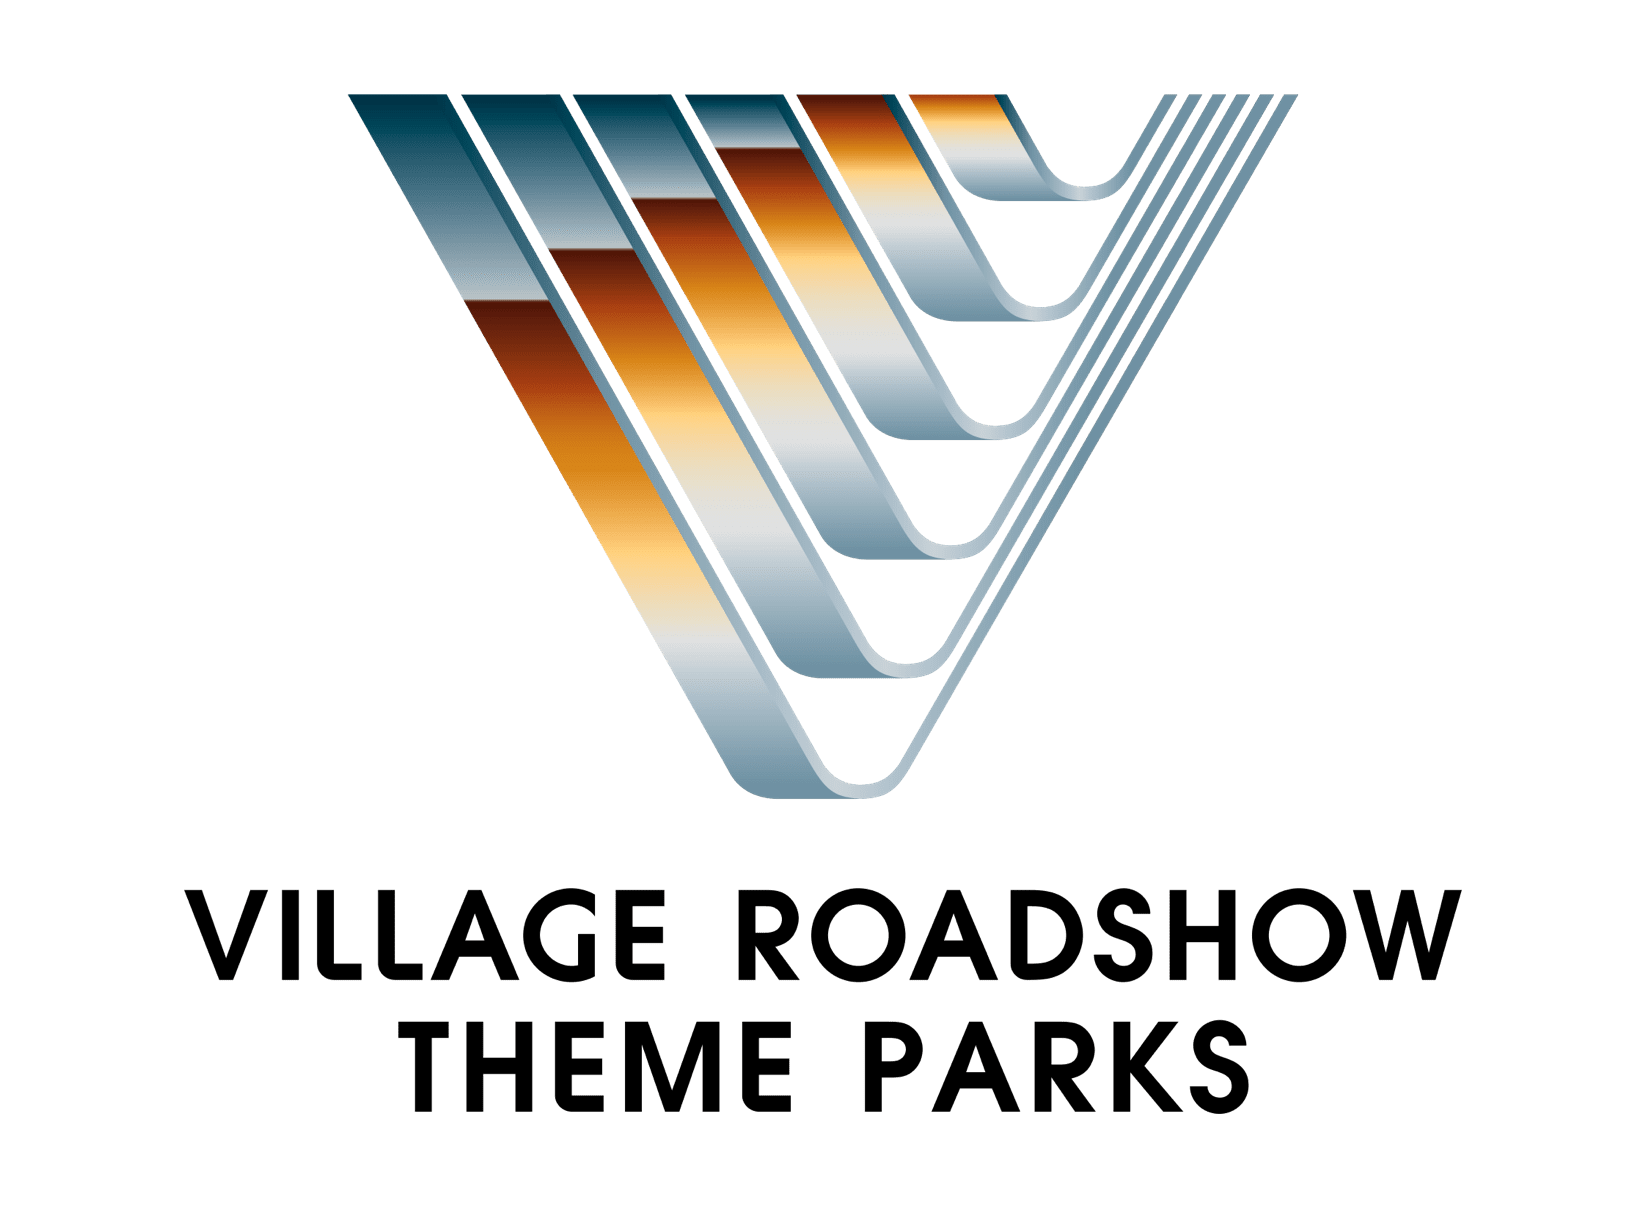 Logo of Village Roadshow Theme Parks featuring a stylized, colorful 'V' above the text on a green background.